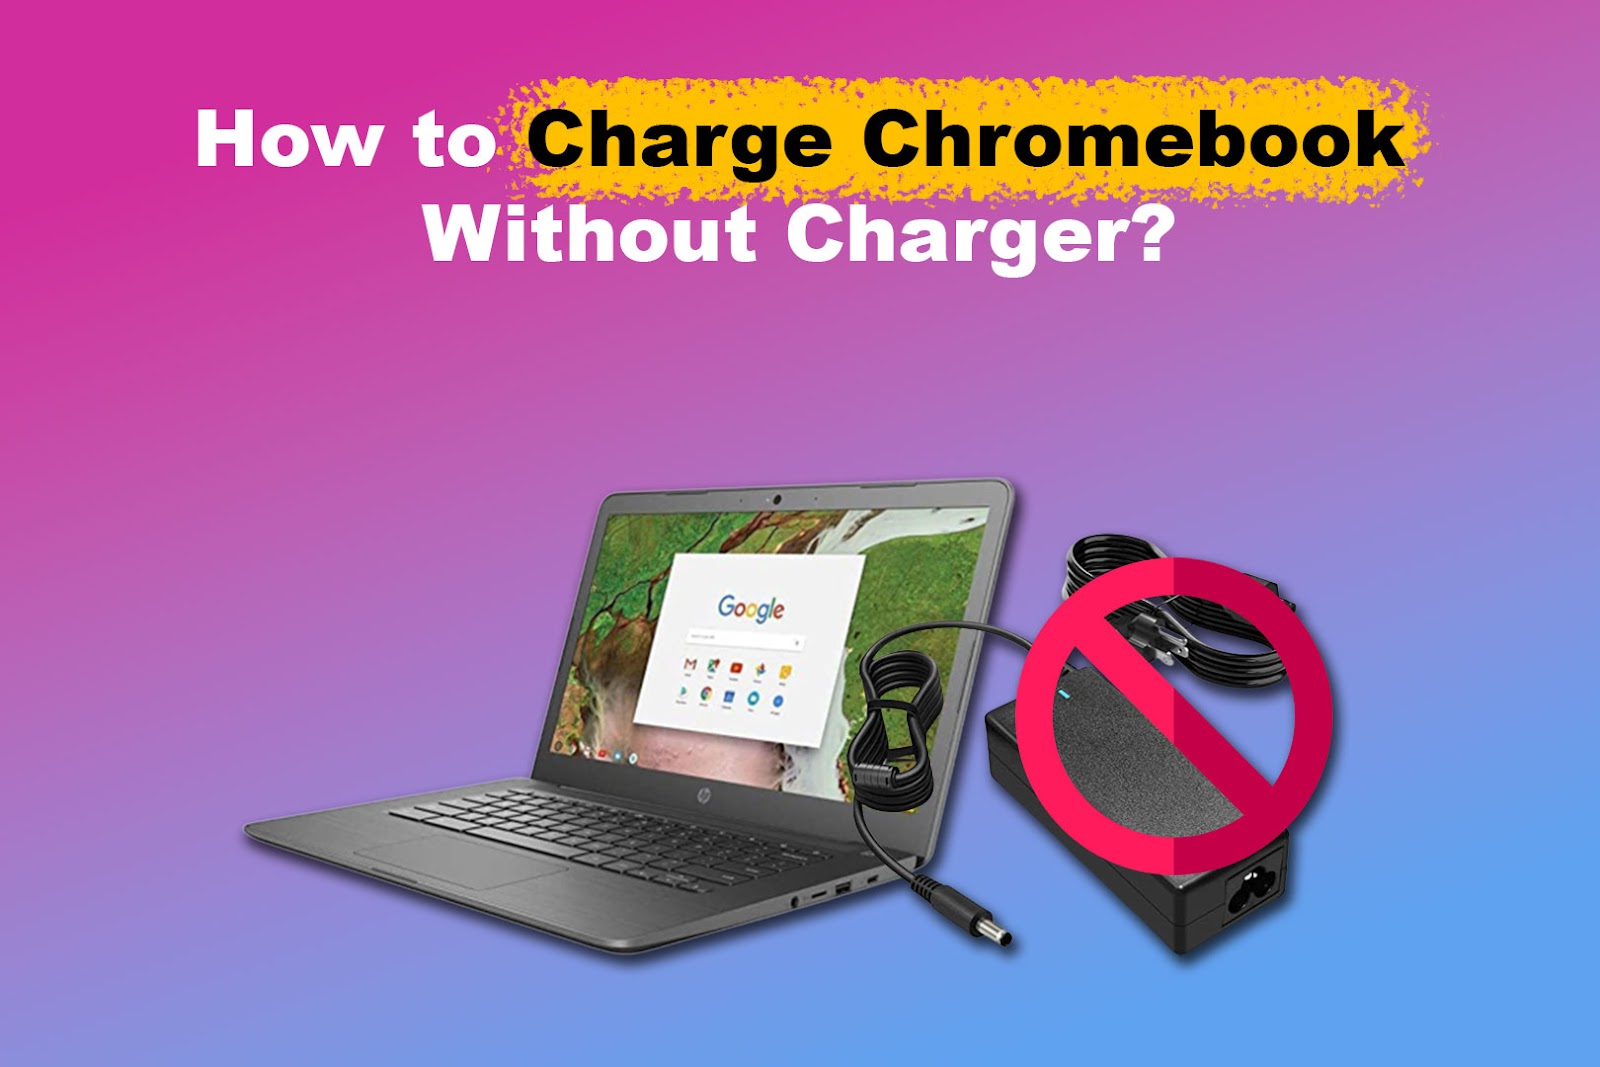 How to Charge Chromebook Without Charger